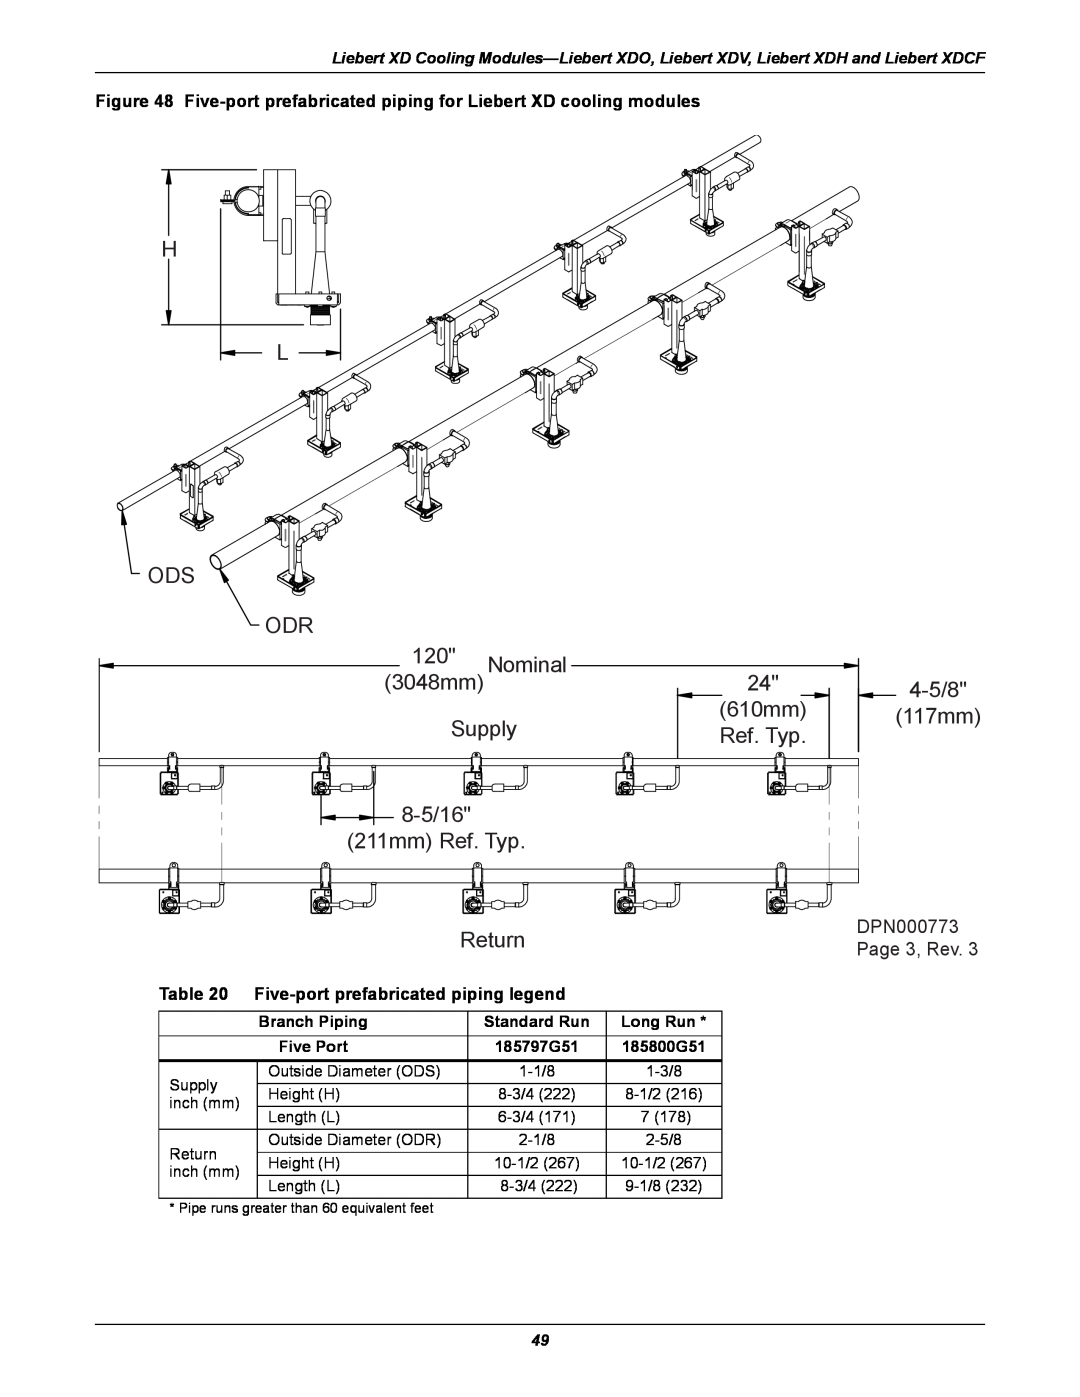 Emerson Xtreme Density manual Page 3, Rev, Five-port prefabricated piping legend 